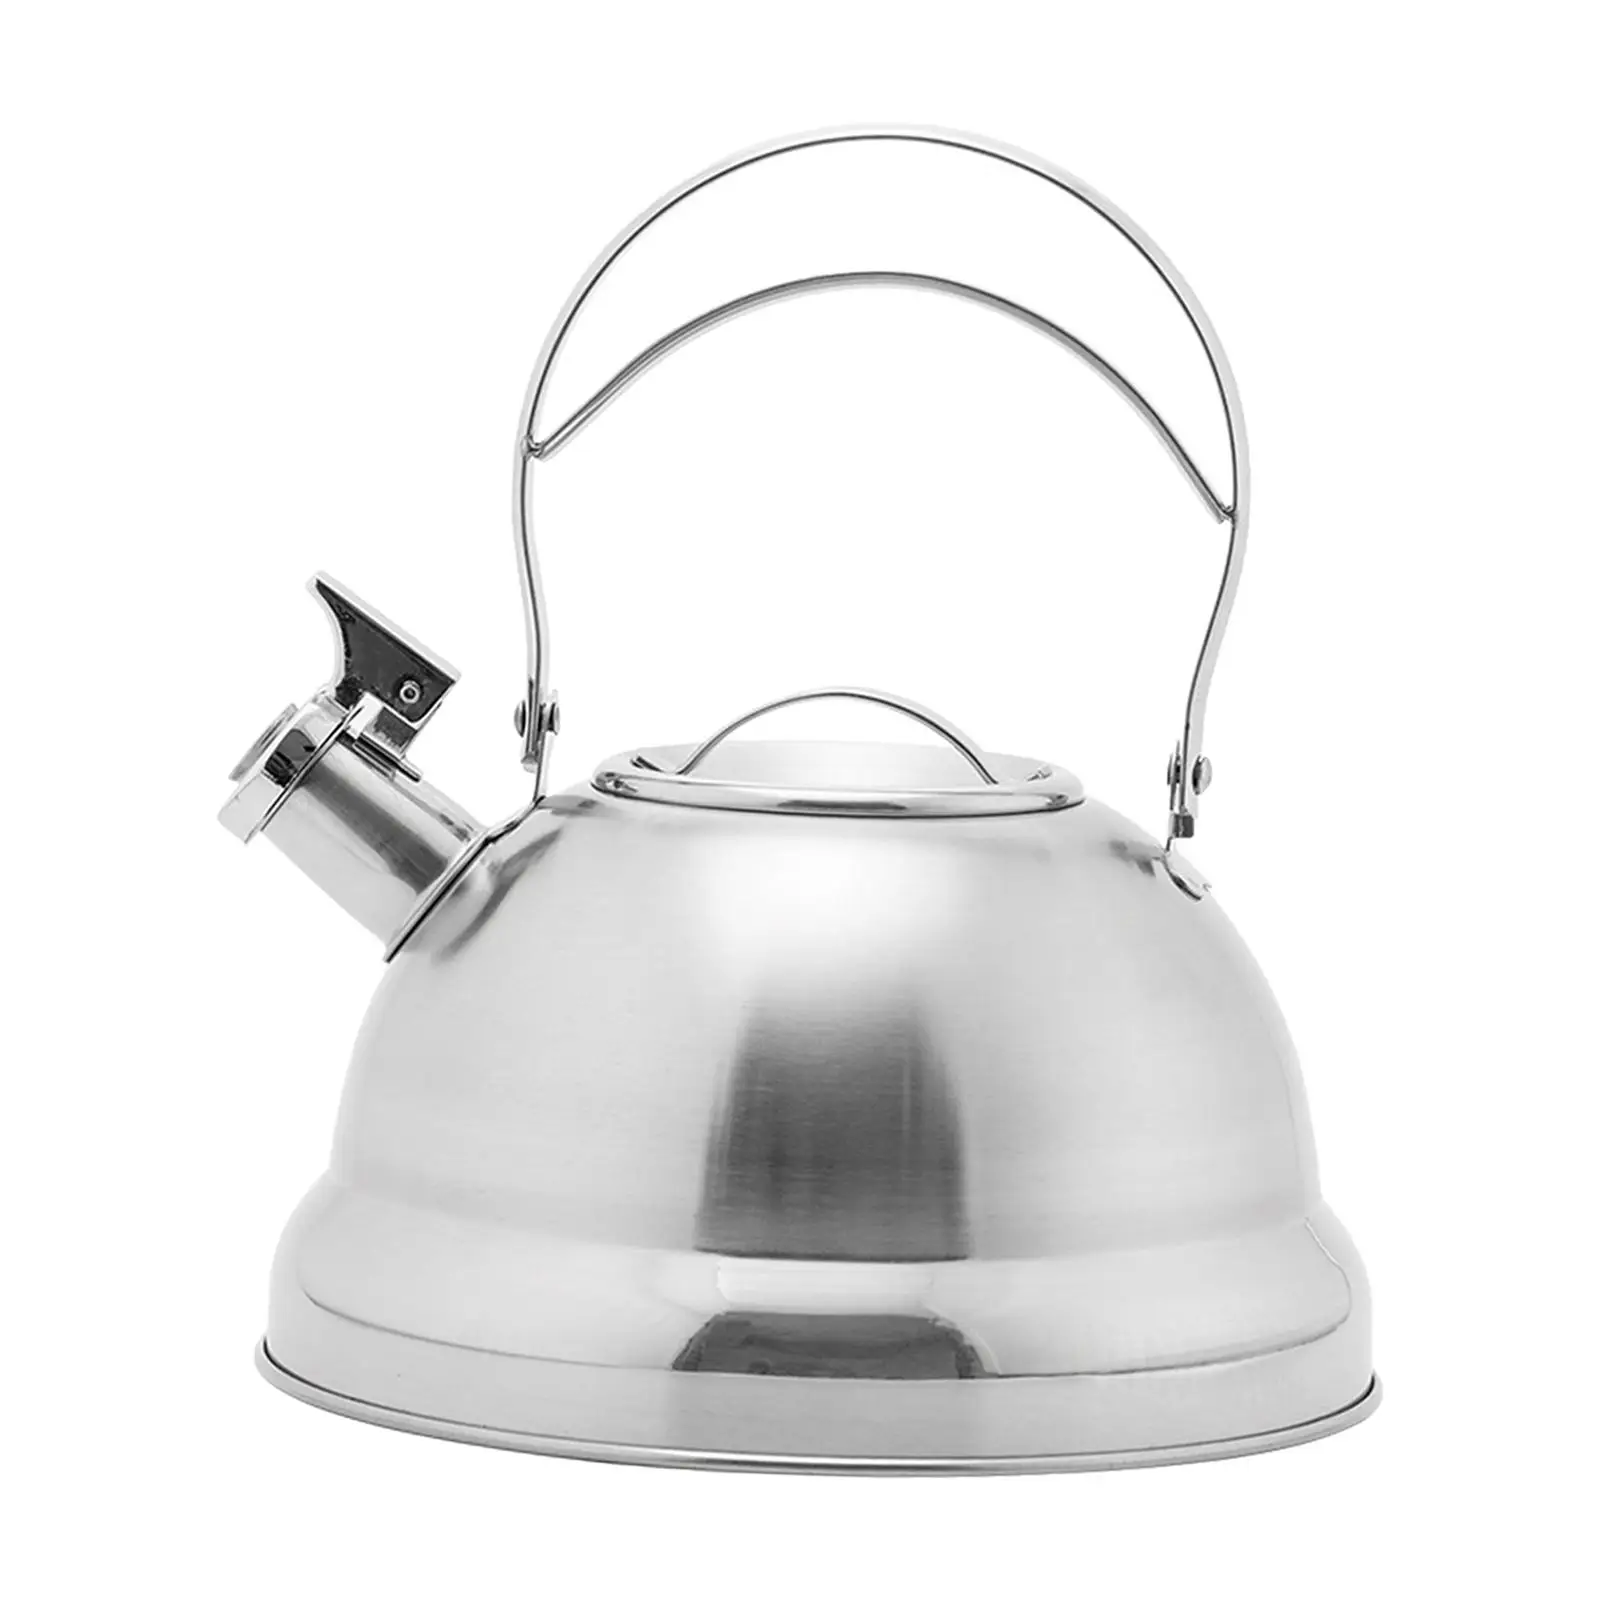 Teakettle 3.5L for Gas All Stovetops Tea Pot with Handle for Outdoor